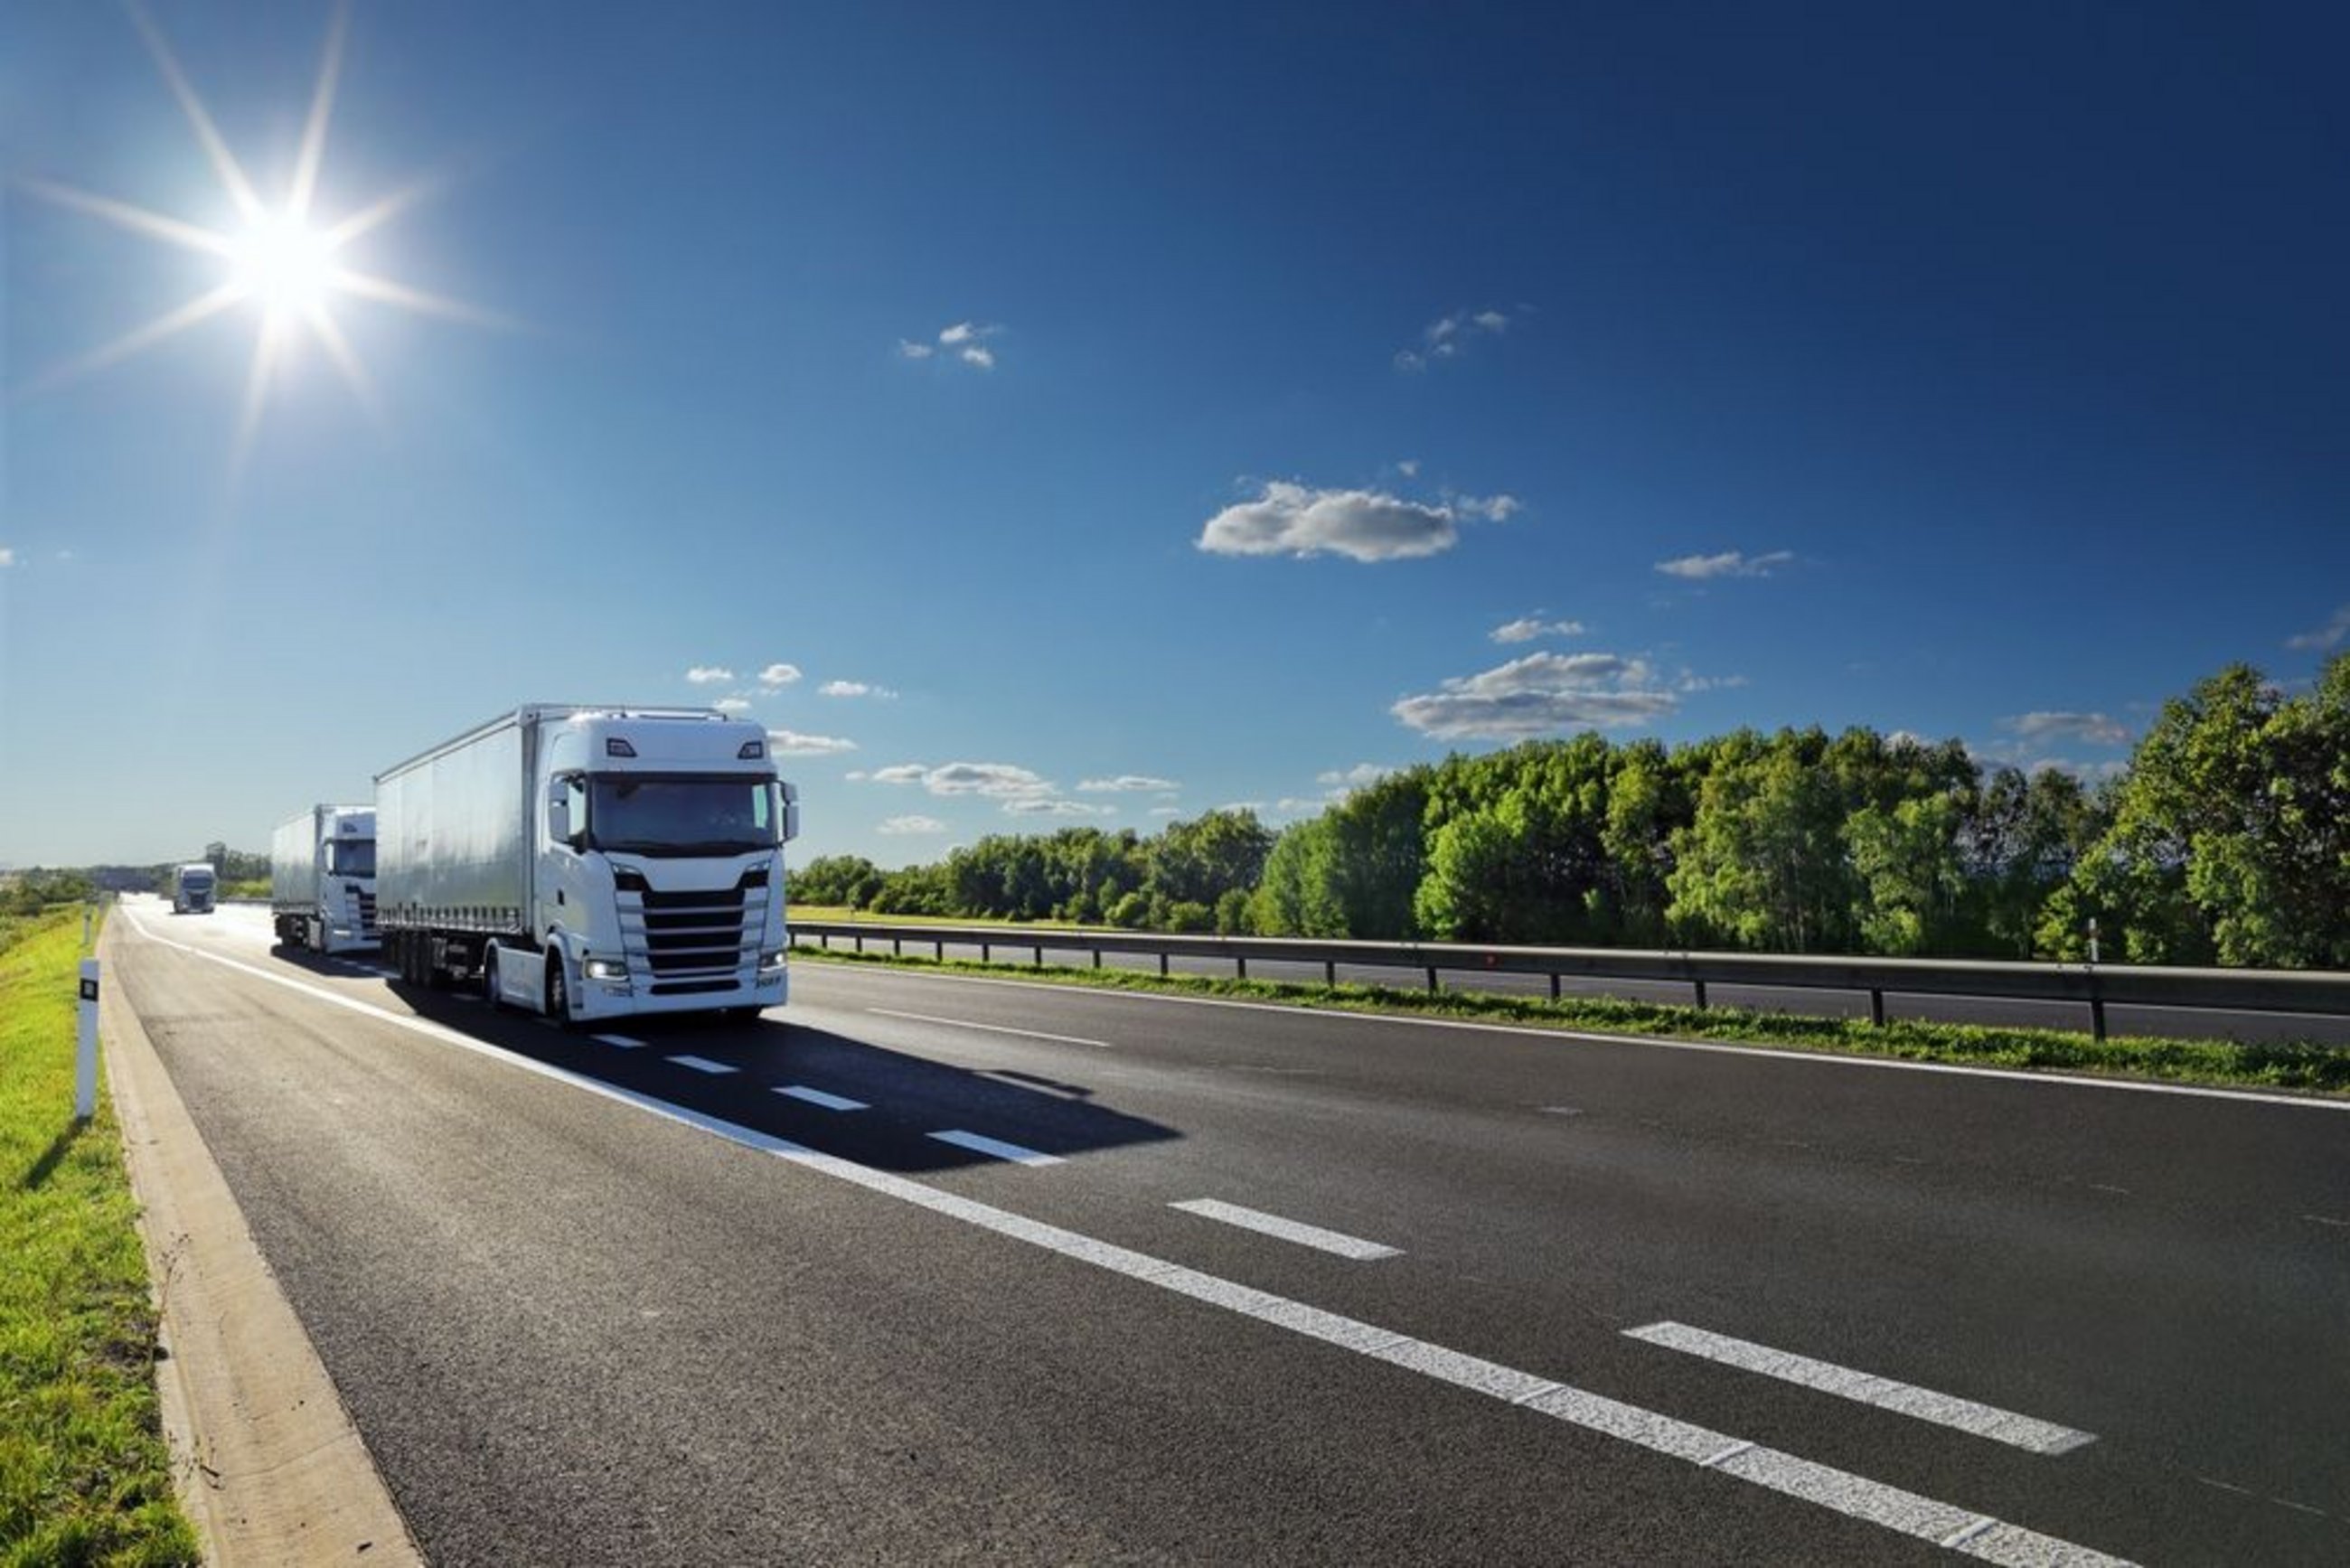 Trucks, vans, buses: cep rejects new CO2 limits as a mistake (cepPolicyBrief)